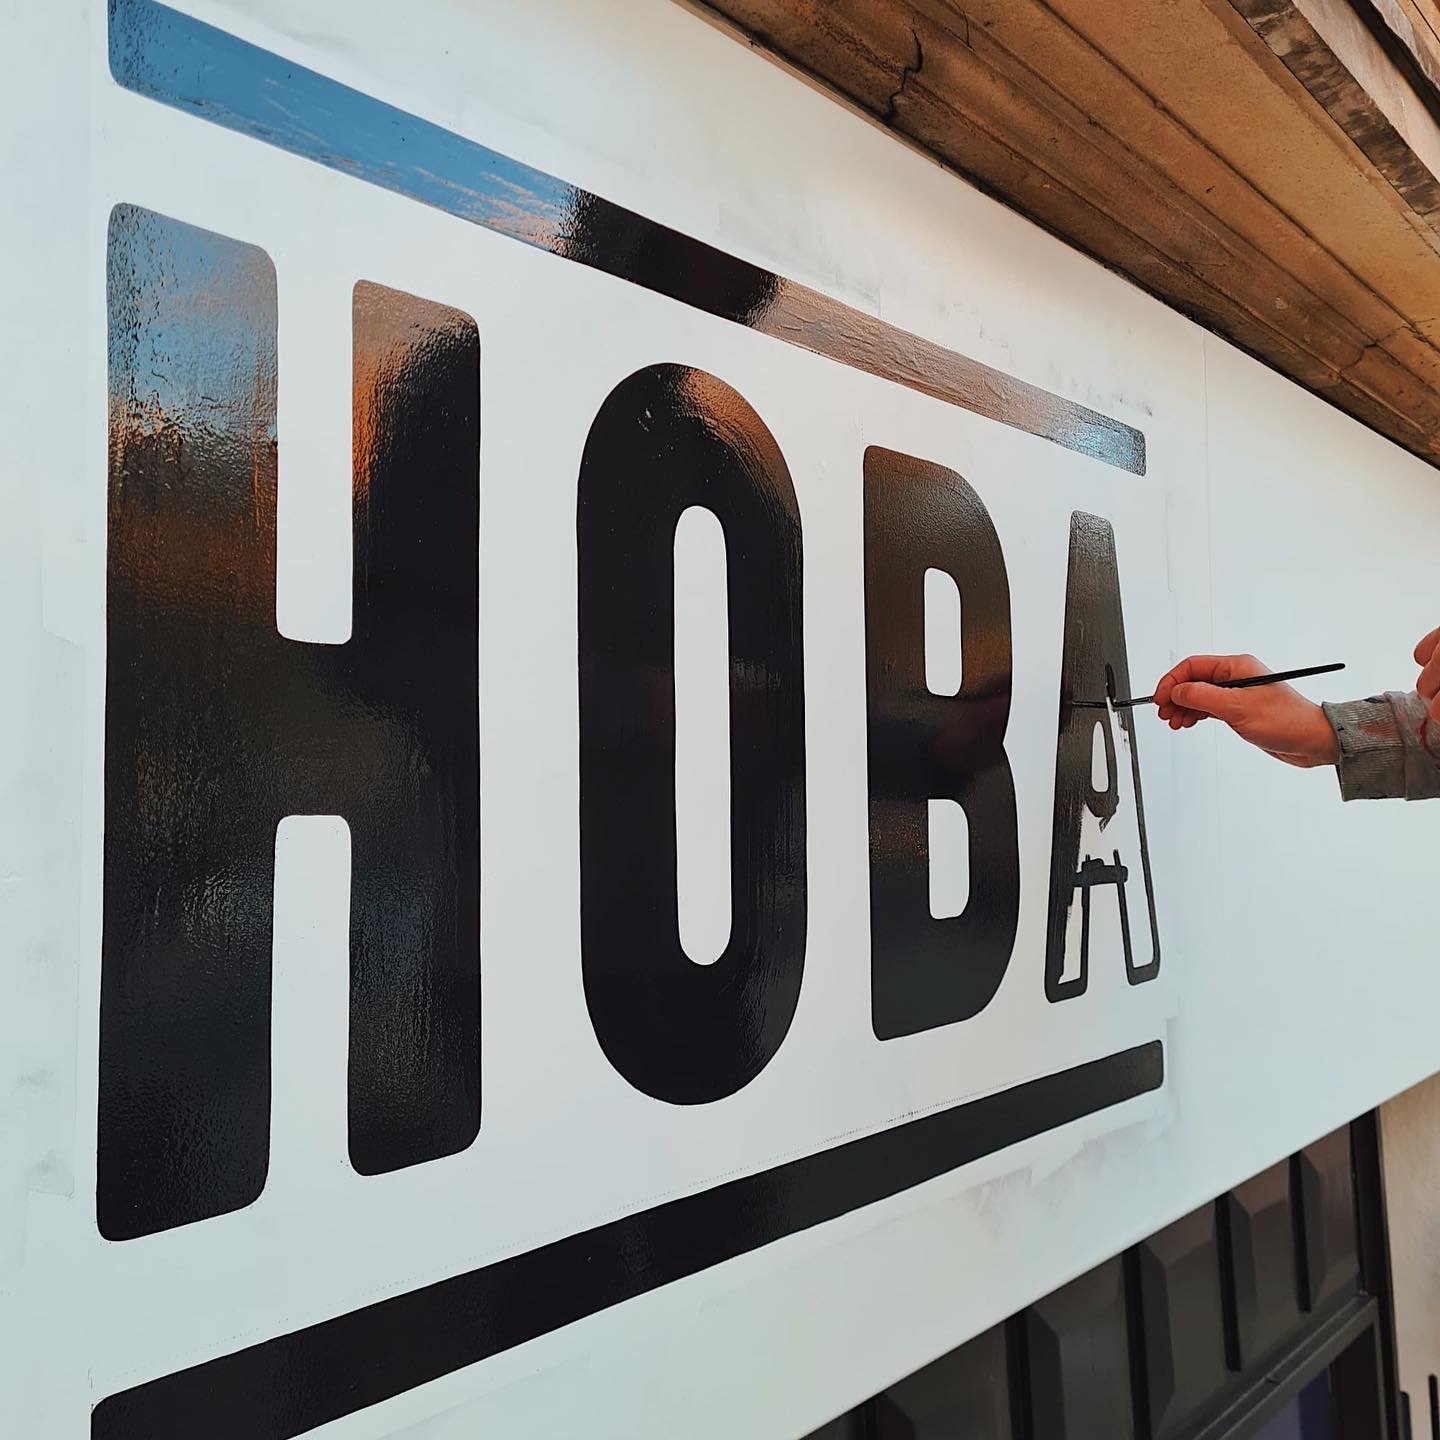 Almost finished photo of a glossy fascia sign spelling 'Hoba'.